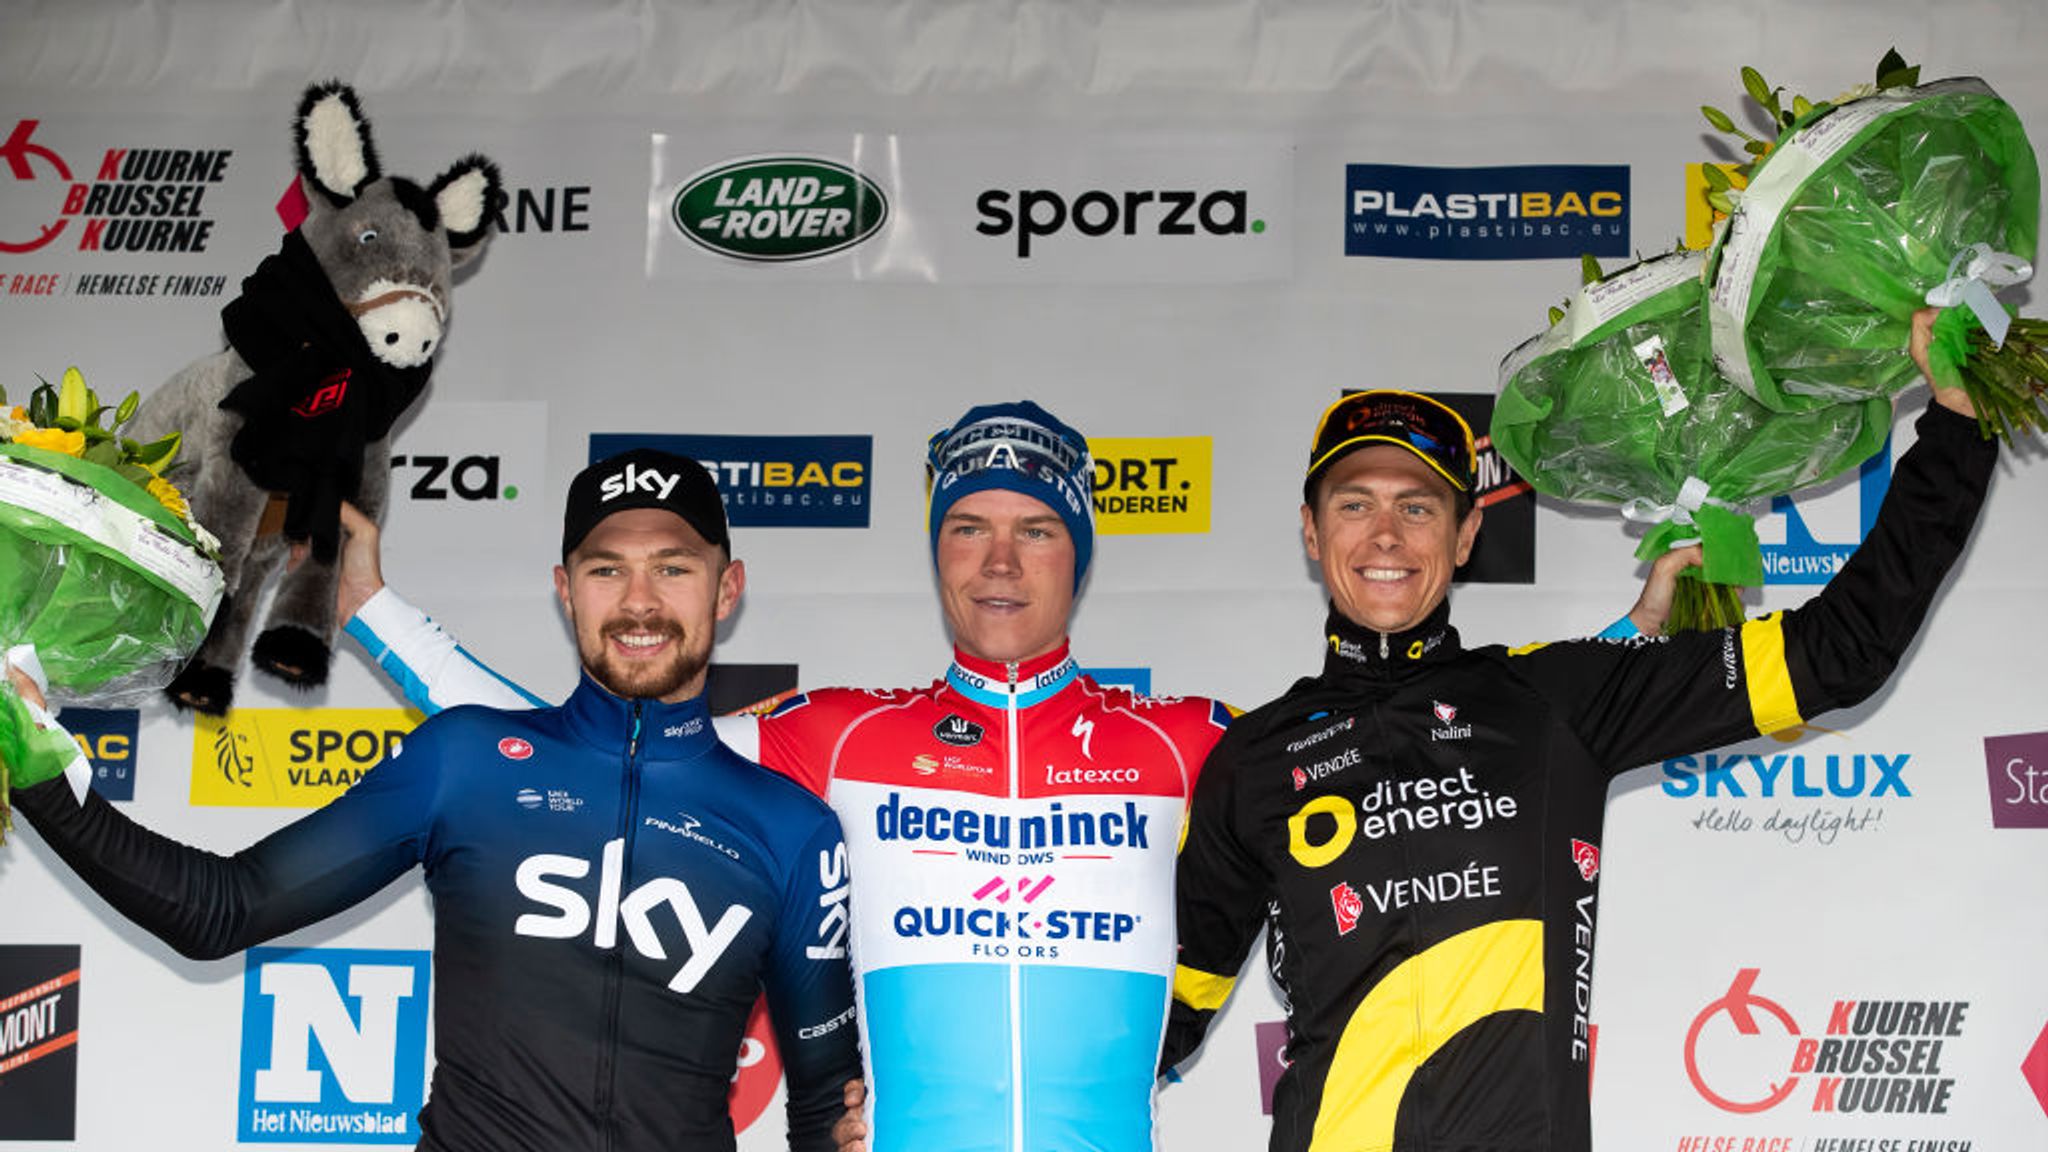 Team Skys Owain Doull second behind Bob Jungels at Kuurne-Brussels-Kuurne Cycling News Sky Sports